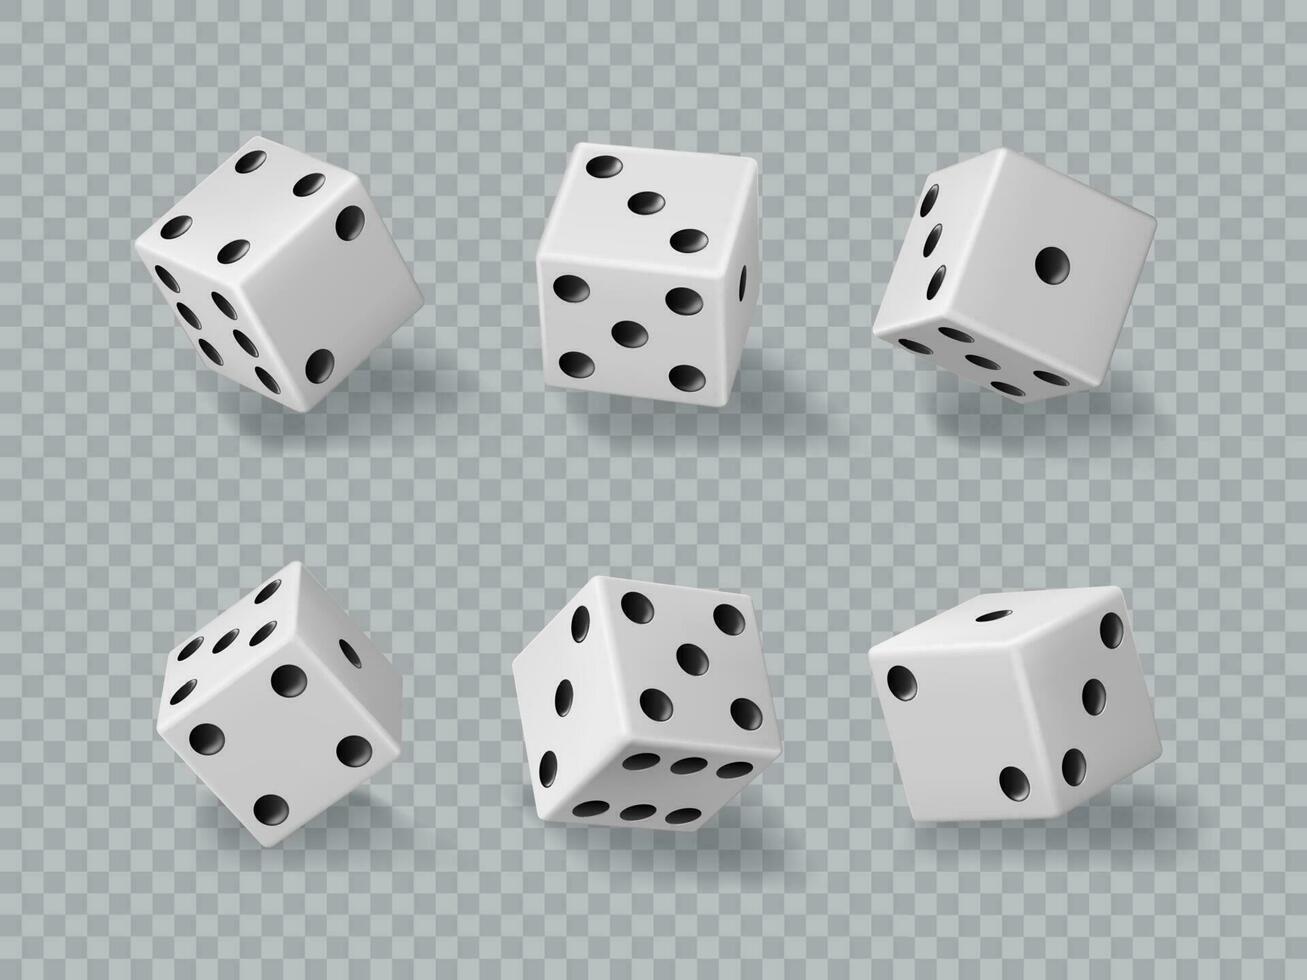 Dice of casino, realistic gamble game cubes, 3D vector